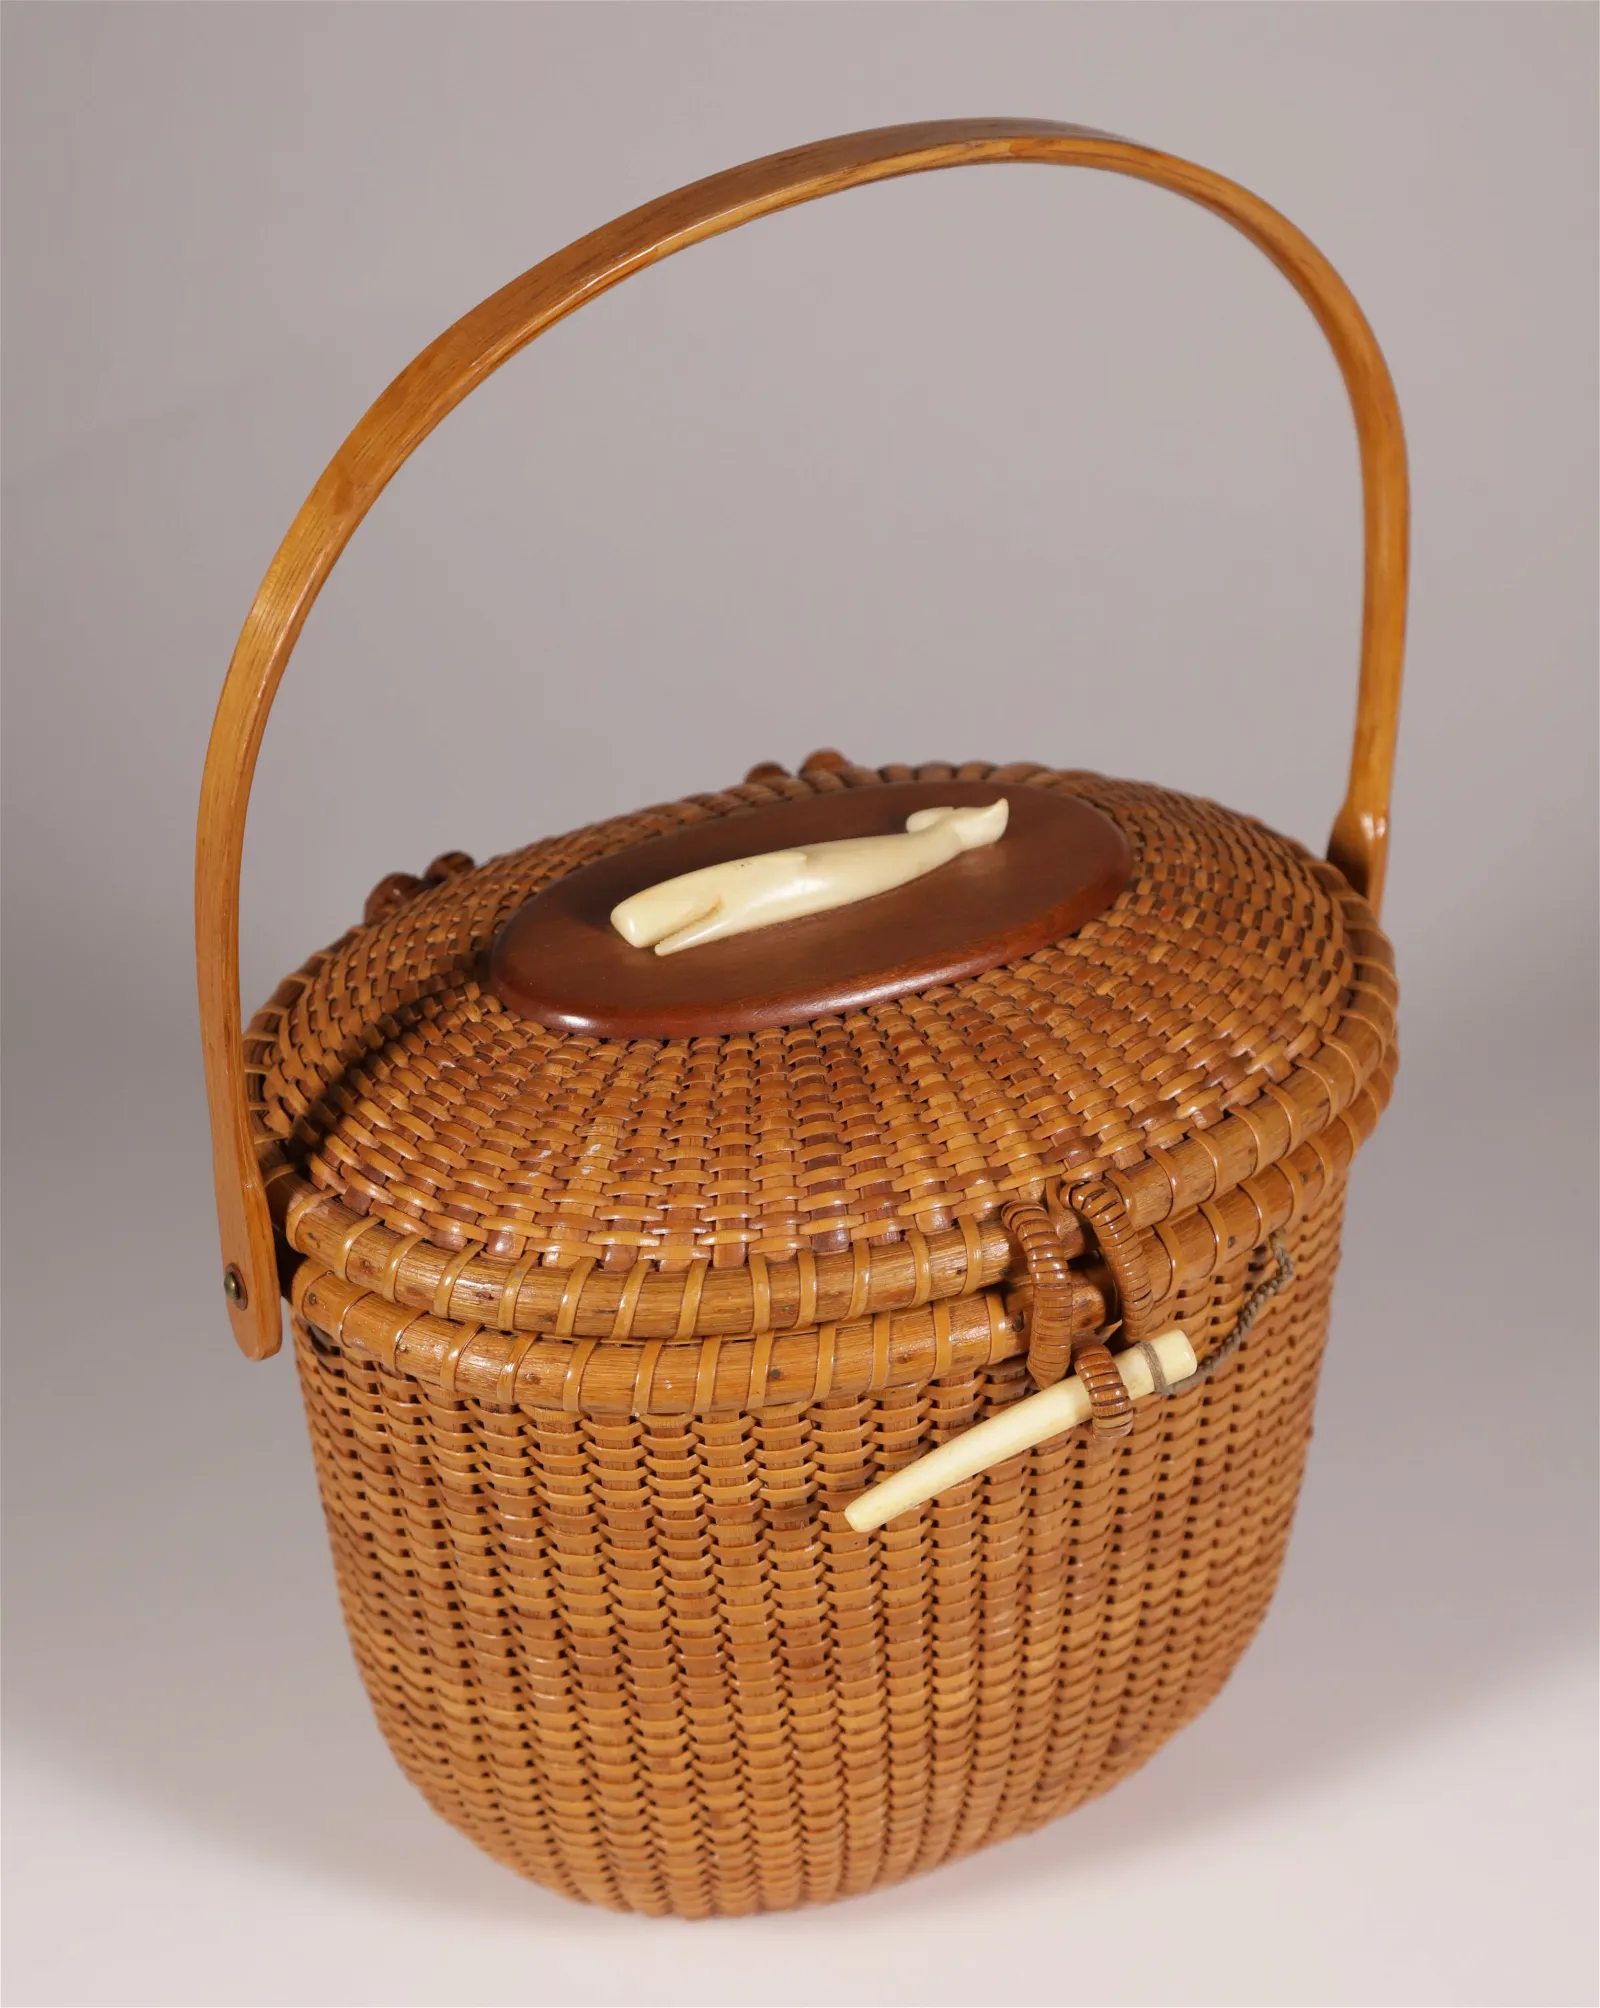 Stephen Gibbs Nantucket friendship basket oval form with Charlie Sayle carved whale. Image courtesy of Rafael Osona Auctions. 
